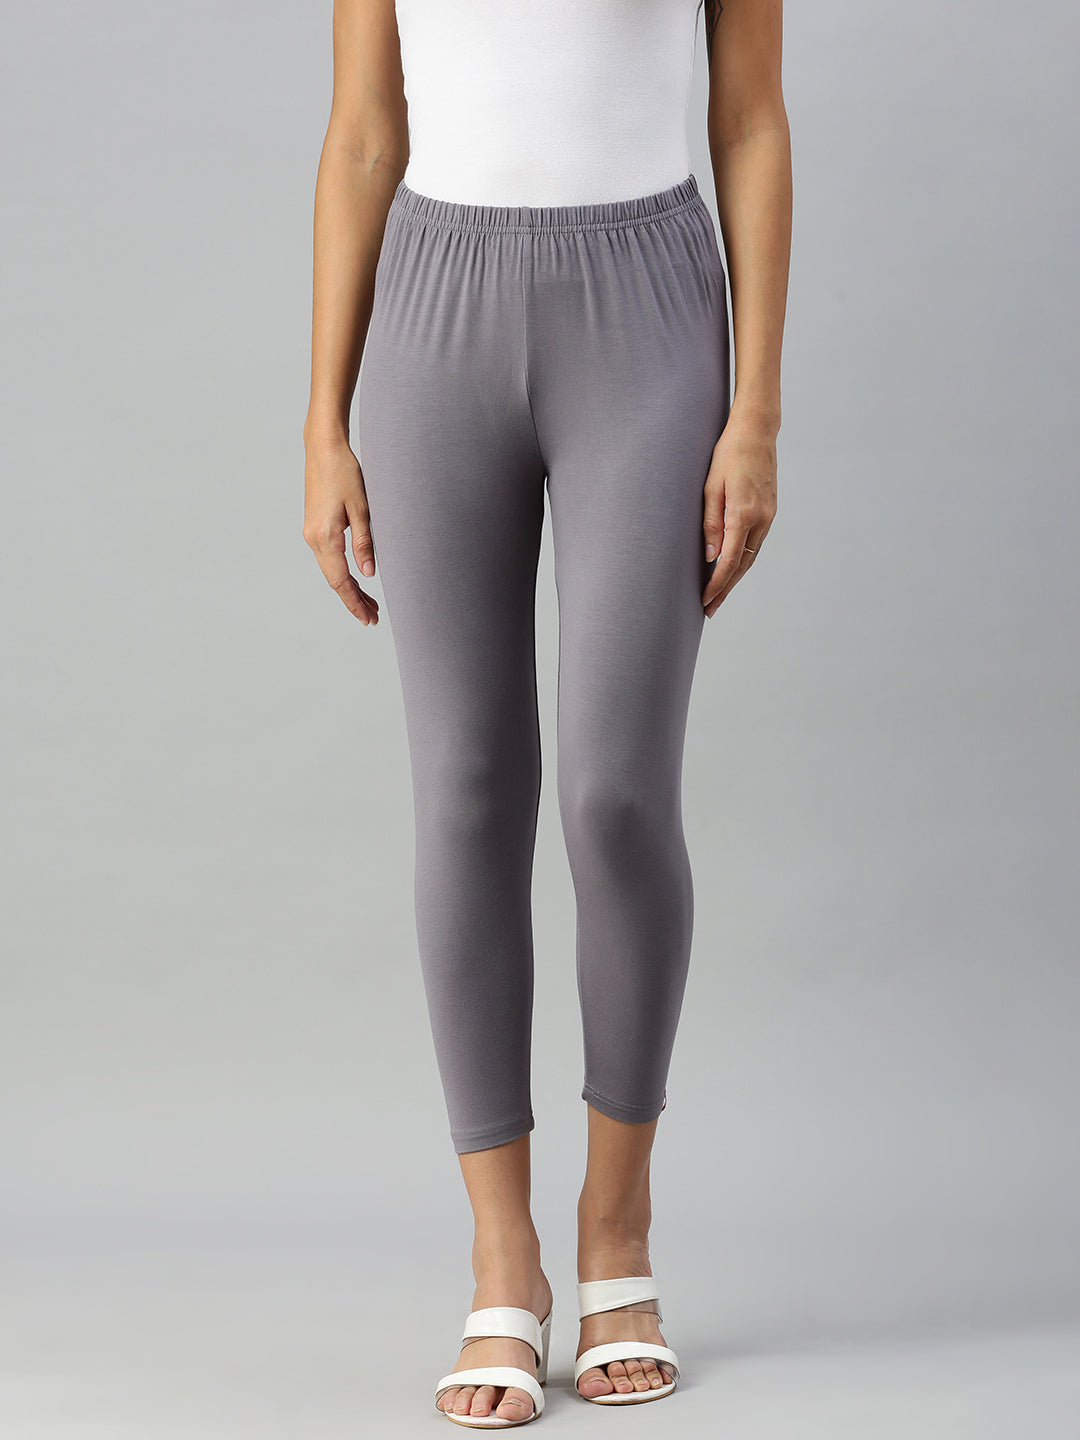 Get Comfy with Prisma's Grey Cuff Length Leggings